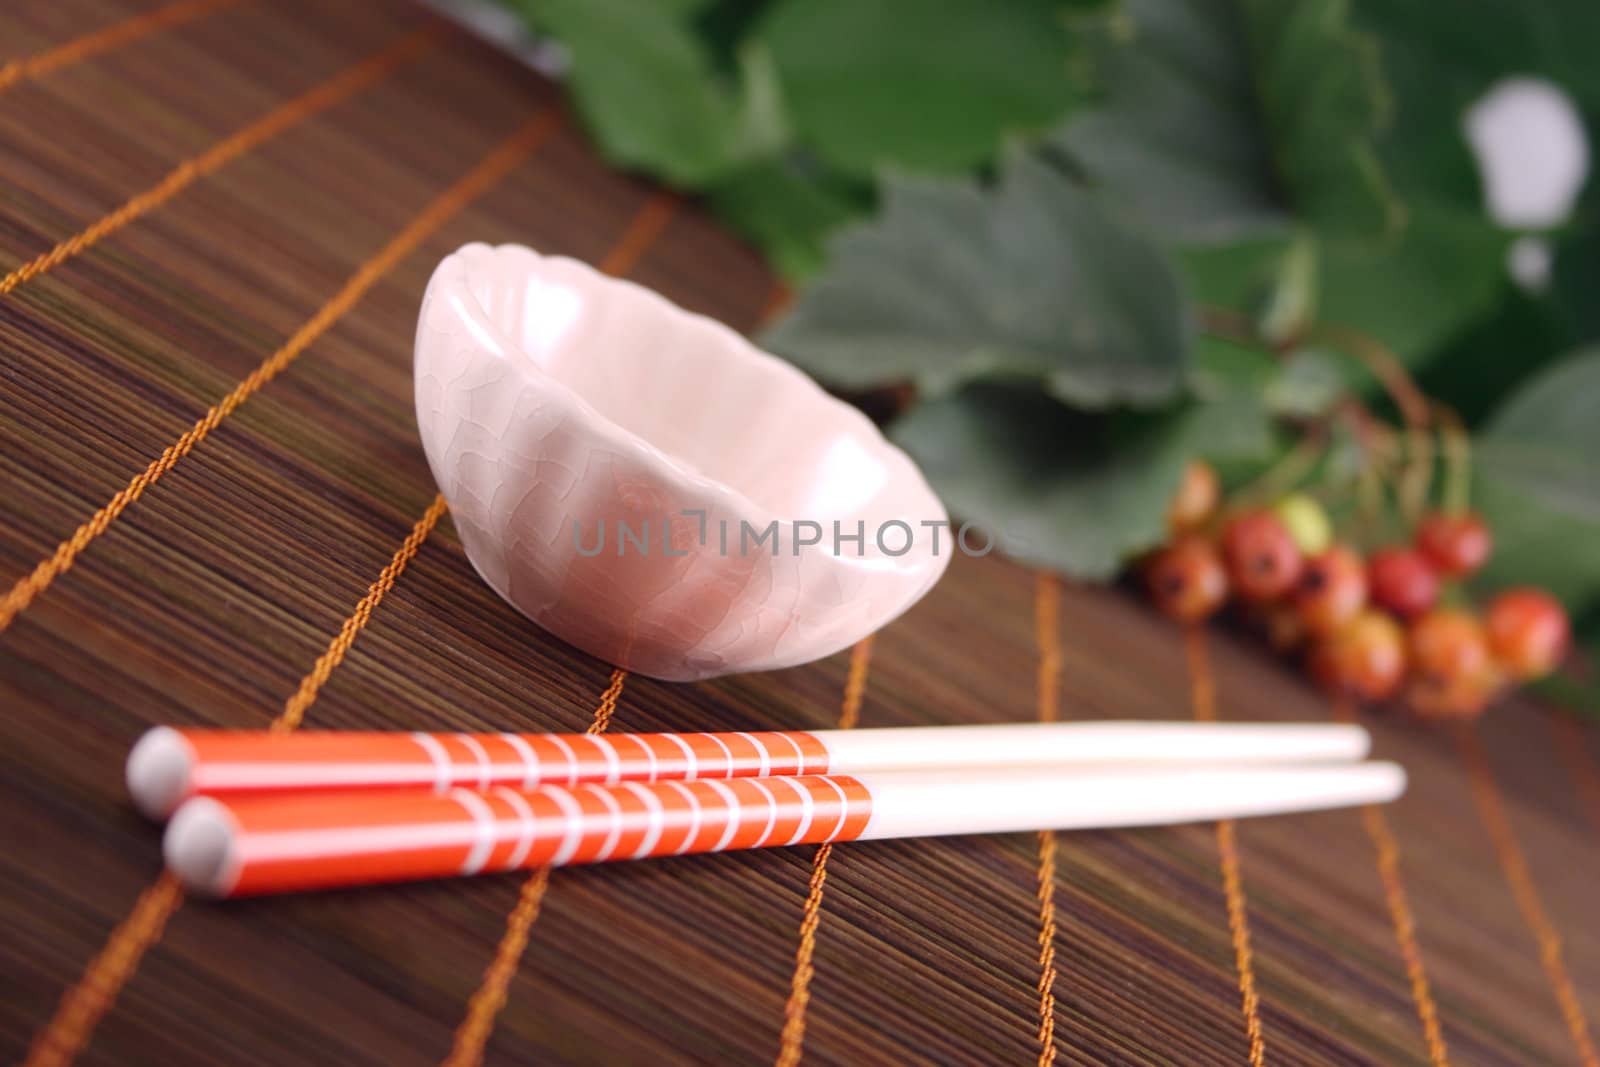 Cup and chopsticks on a wooden napkin against plants